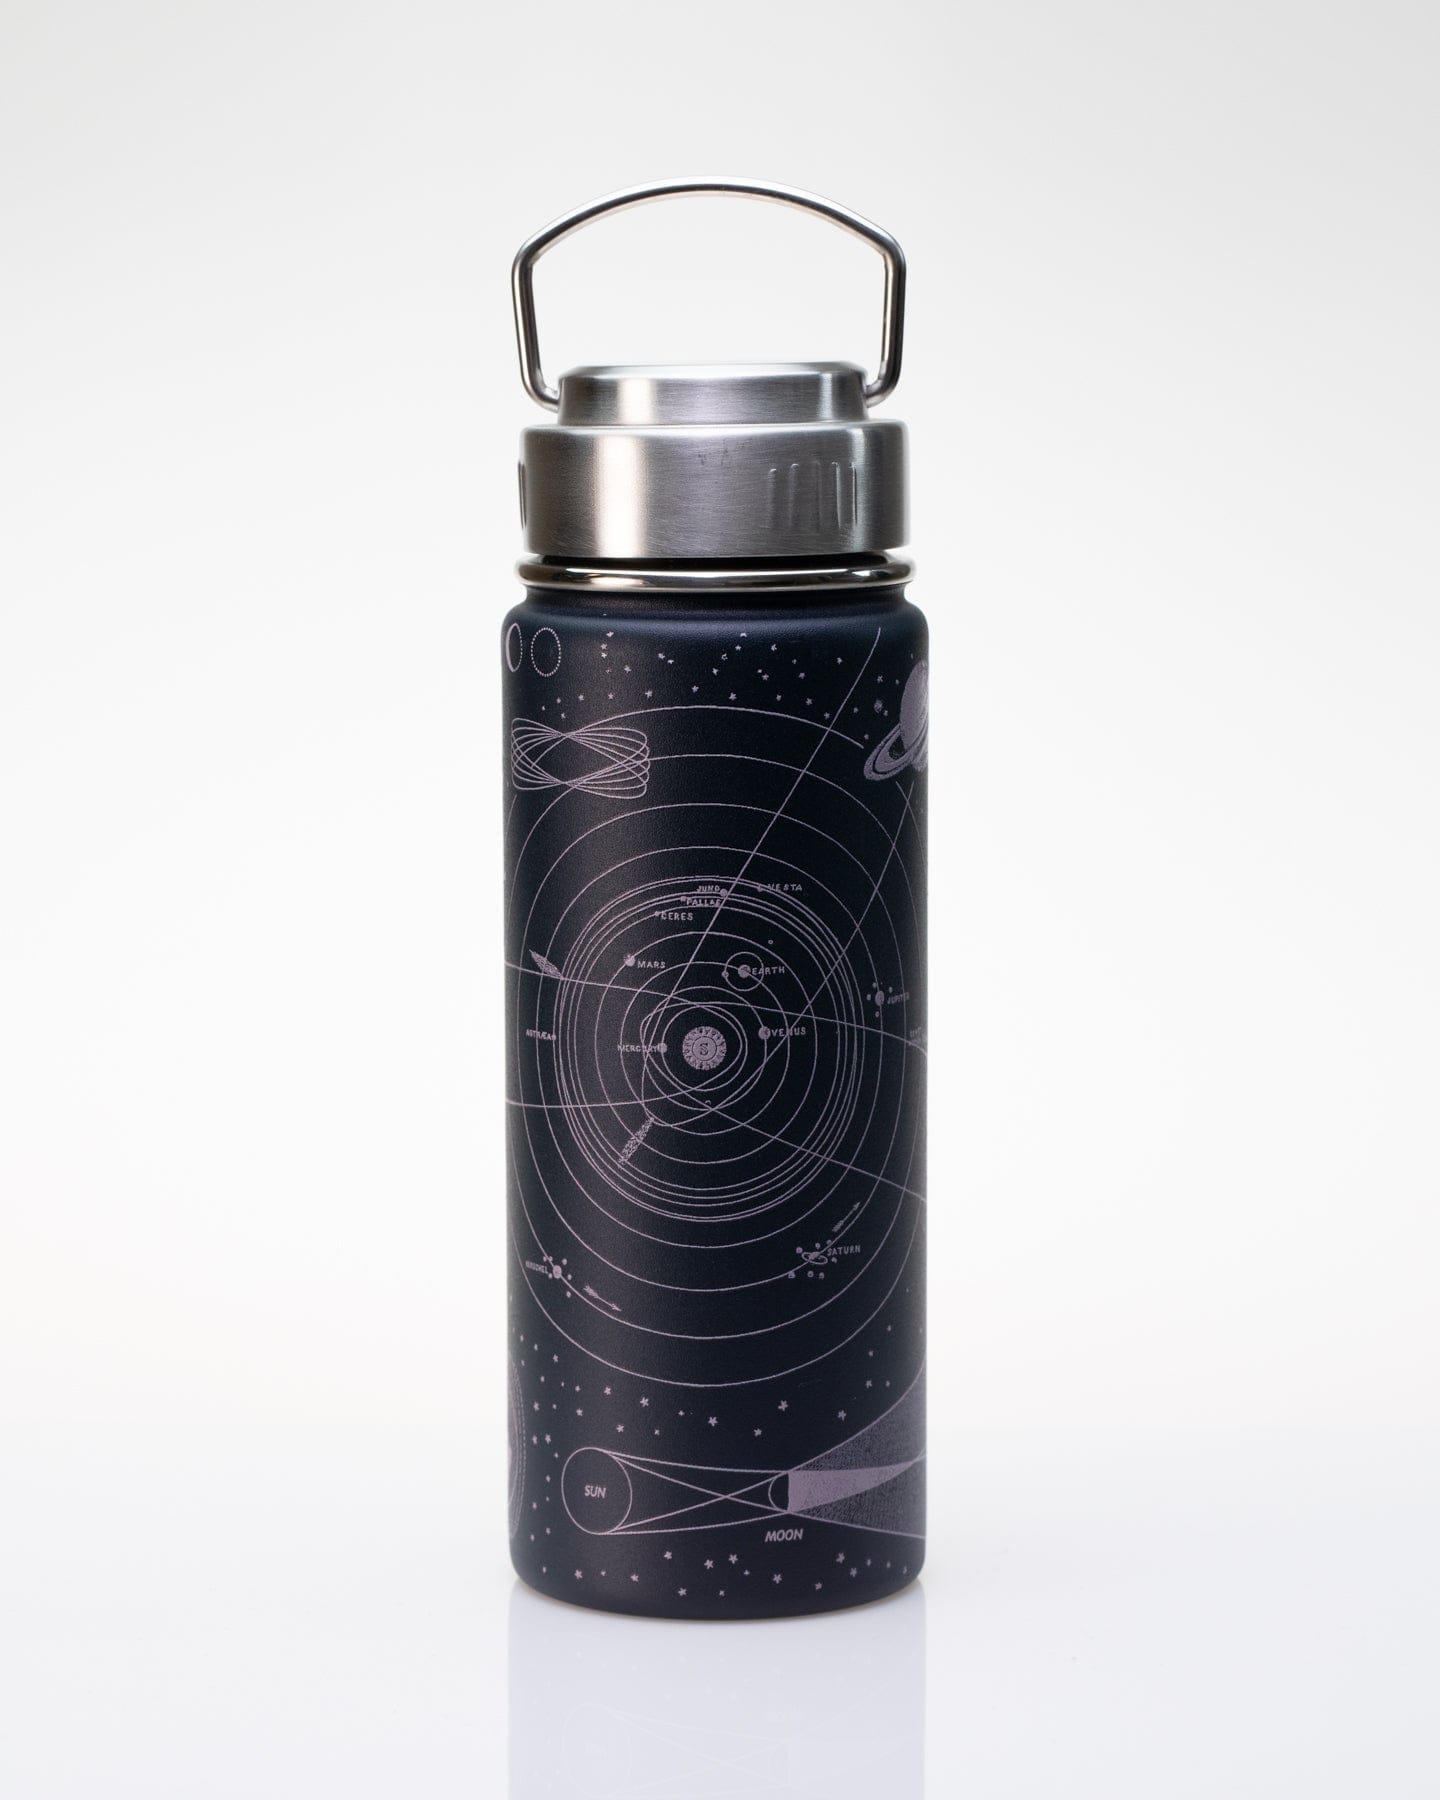 Thermo Flask Water Bottles Stainless Steel Thermal Mug 12oz 18oz